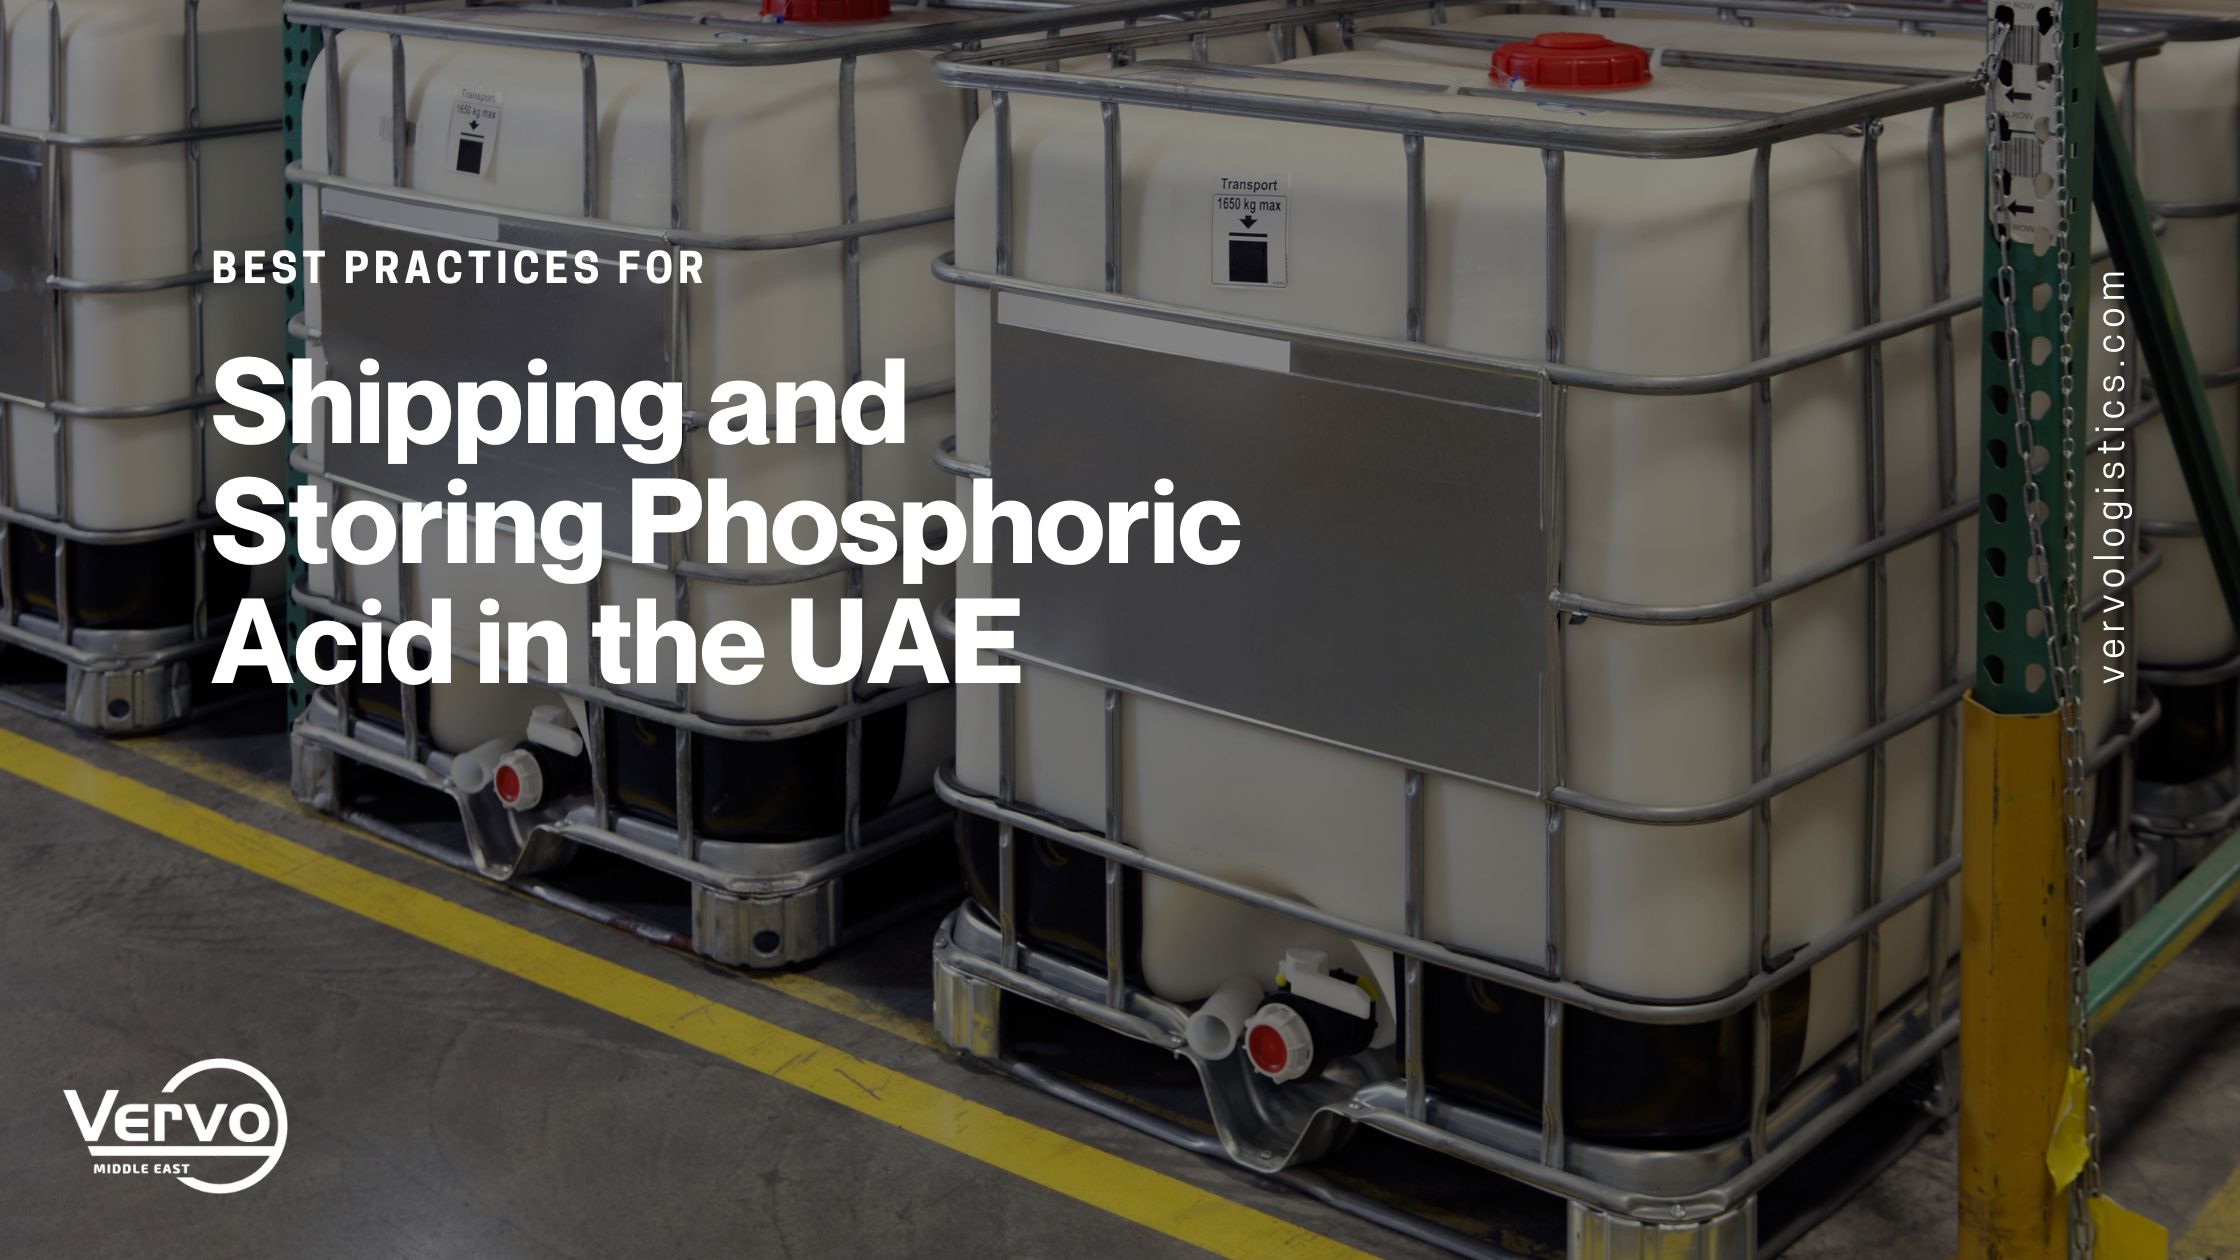 Best Practices for Shipping and Storing Phosphoric Acid in the UAE by vervo middle east for shipping and logistics services in the UAE